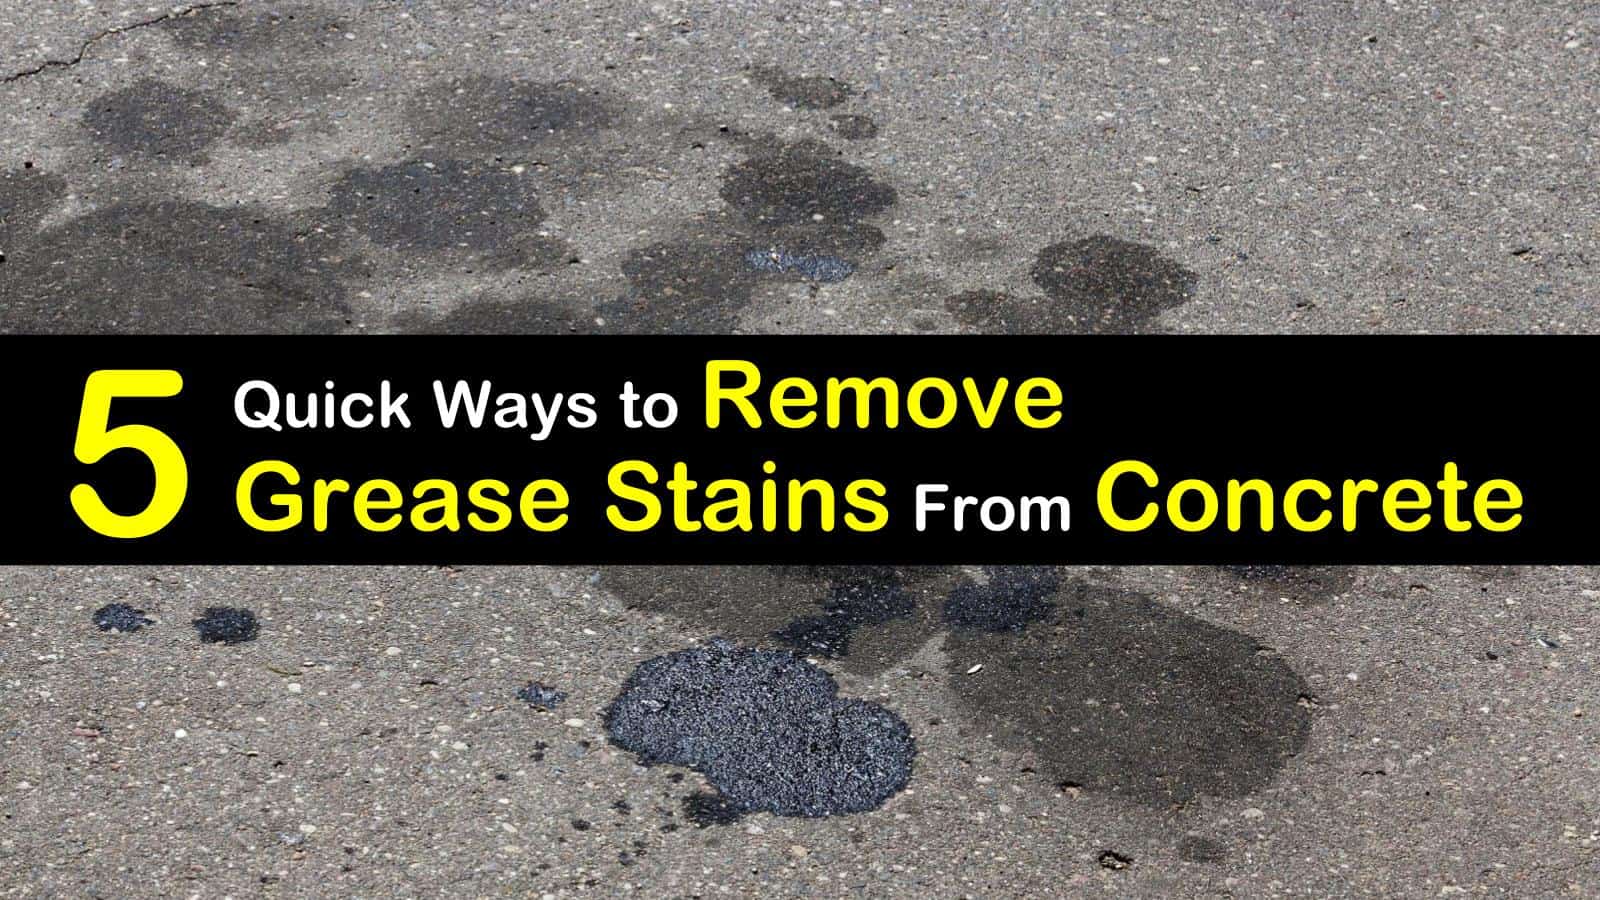 10 Quick Ways to Remove Grease Stains from Concrete